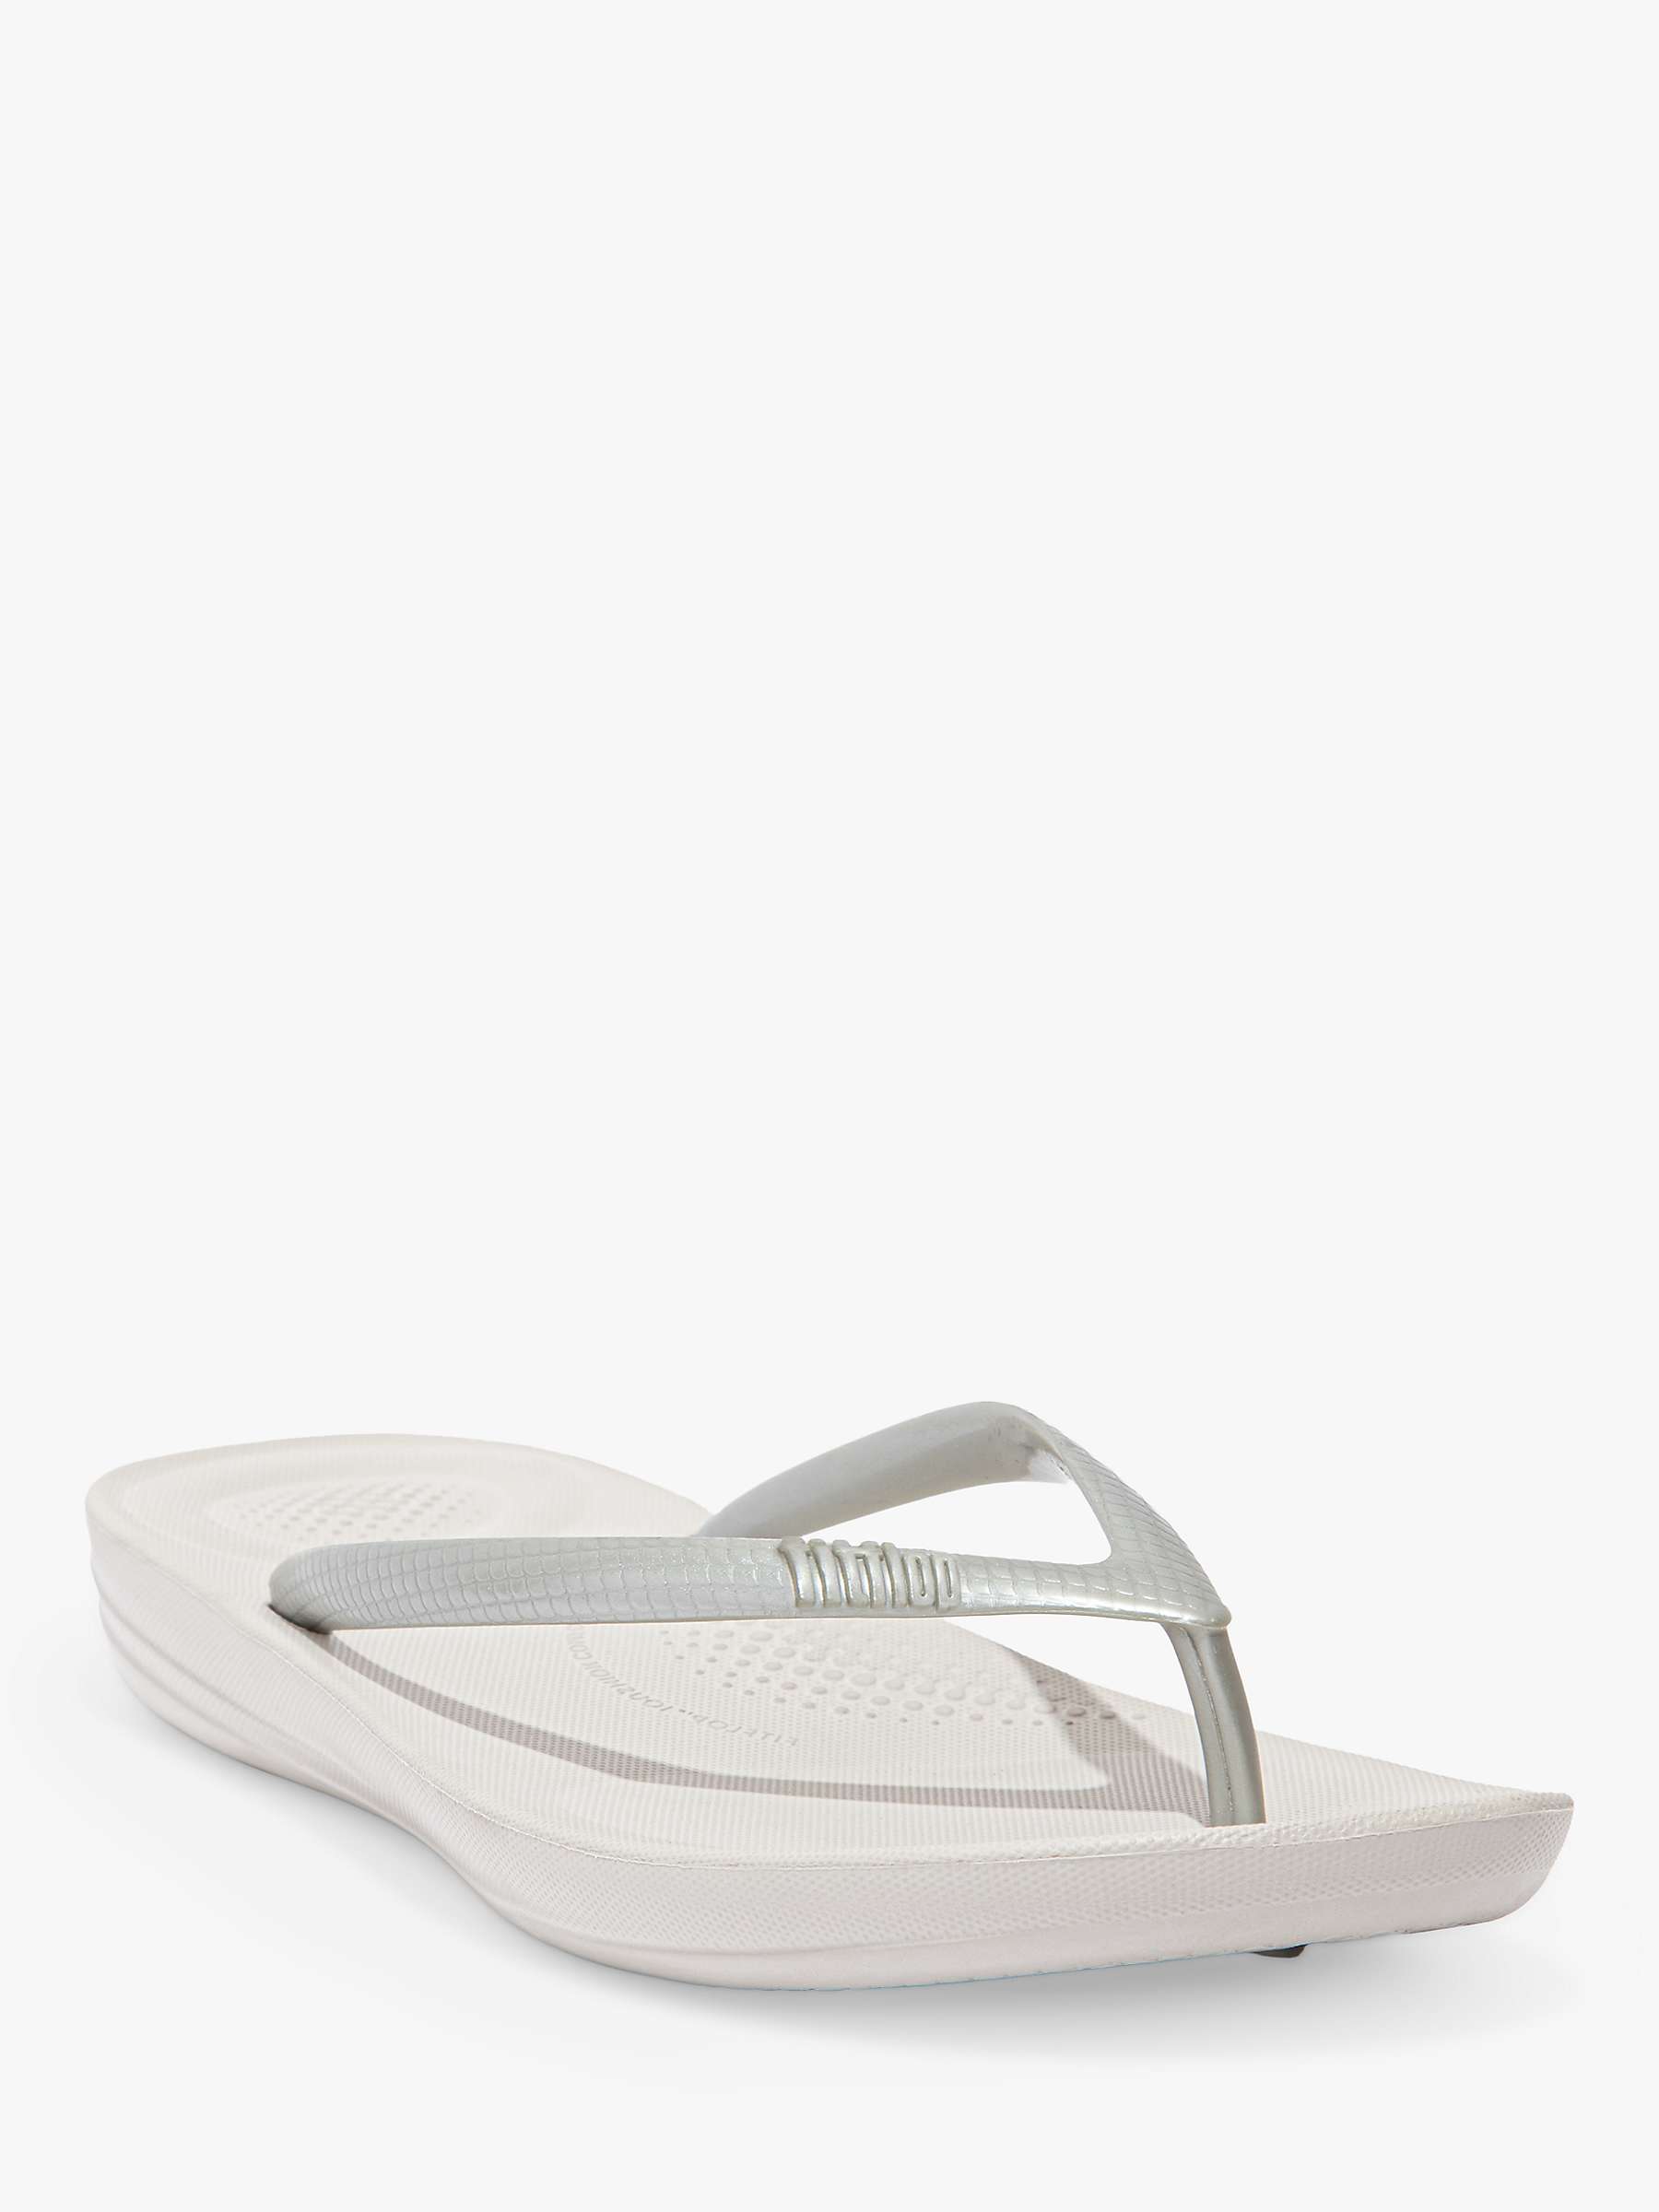 FitFlop IQushion Ergonomic Flip Flops, Silver at John Lewis & Partners